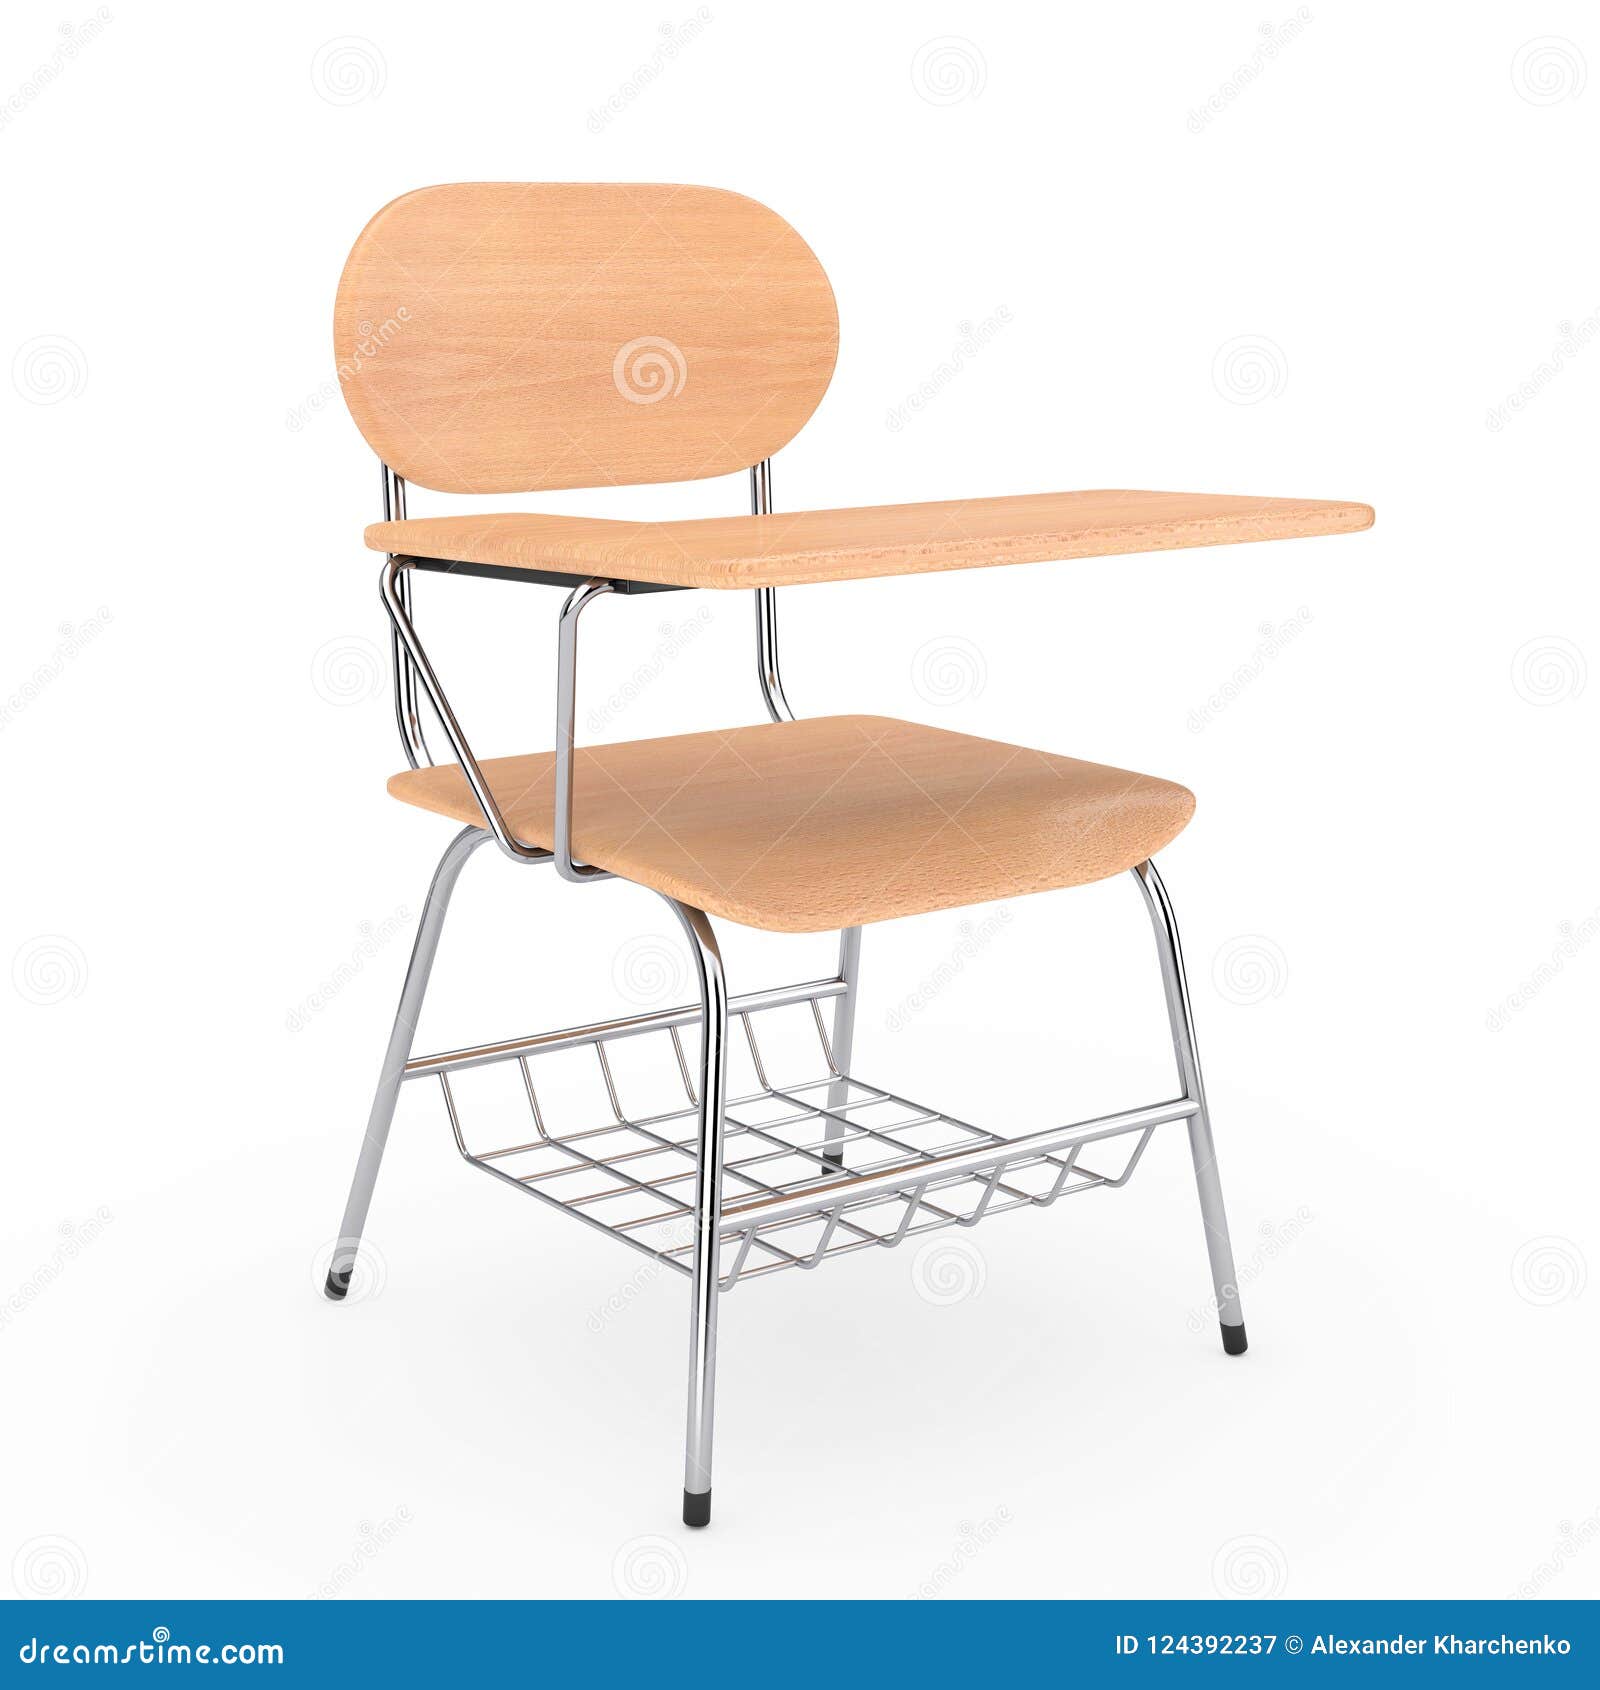 Wooden Lecture School Or College Desk Table With Chair 3d